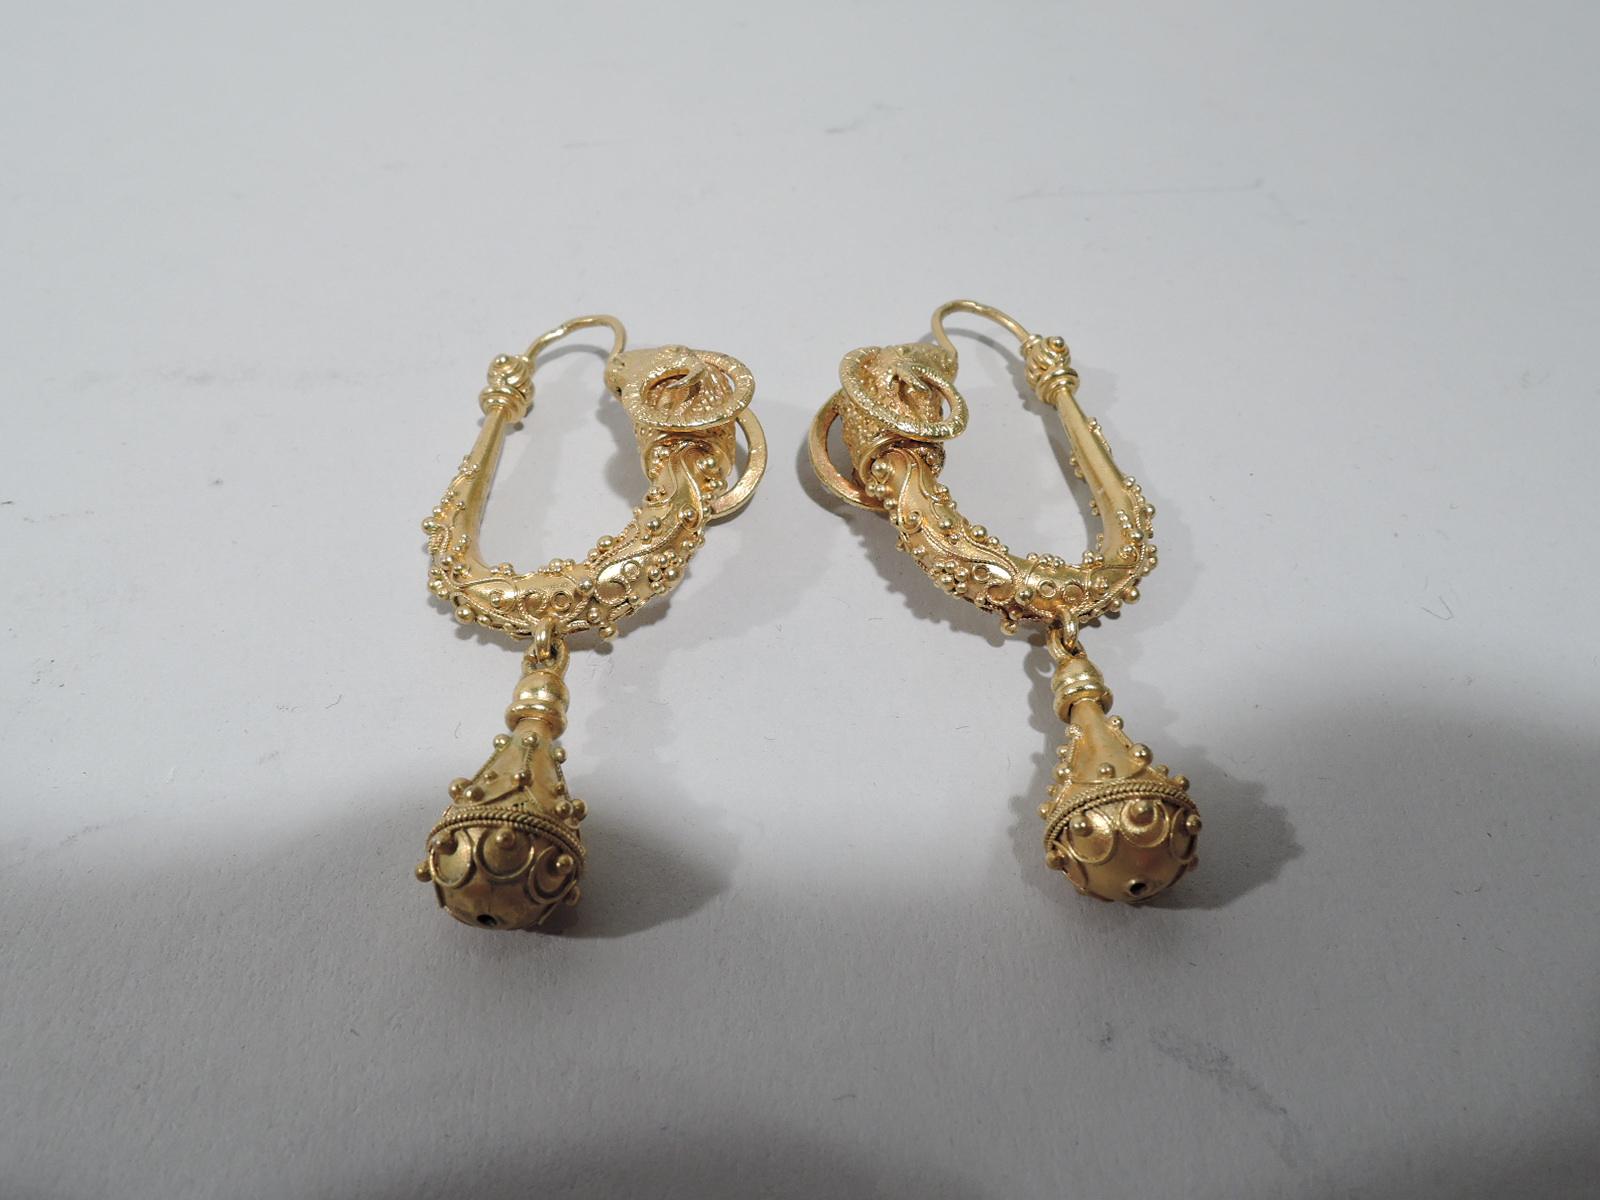 Pair of exquisite Italian Etruscan Revival 18k gold earrings, ca 1860. U-form with ram head terminal, and applied beading and rope; drop same. Back to front. Beautiful craftsmanship. Marked. 